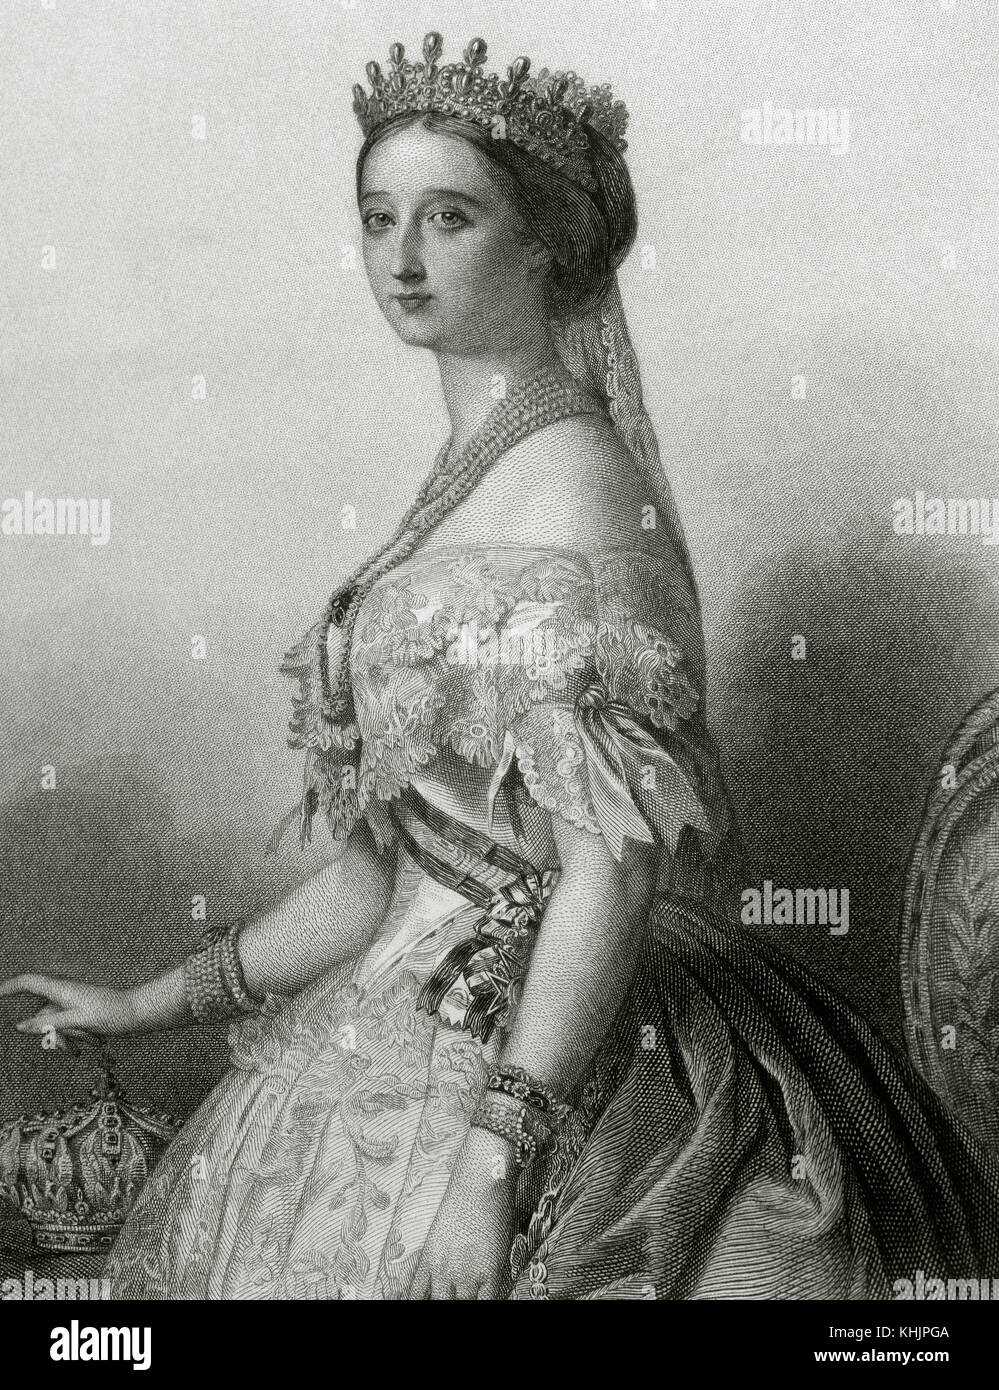 Eugenie de Montijo (1826-1920), 16th Countess of Teba, 15th Marchioness of Ardales (1826-1920). Last Empress consort of the French (1853-1871), as the wife of Napoleon III, Emperor of the French. Portrait. Engraving. 'Historia Universal', 1881. Stock Photo